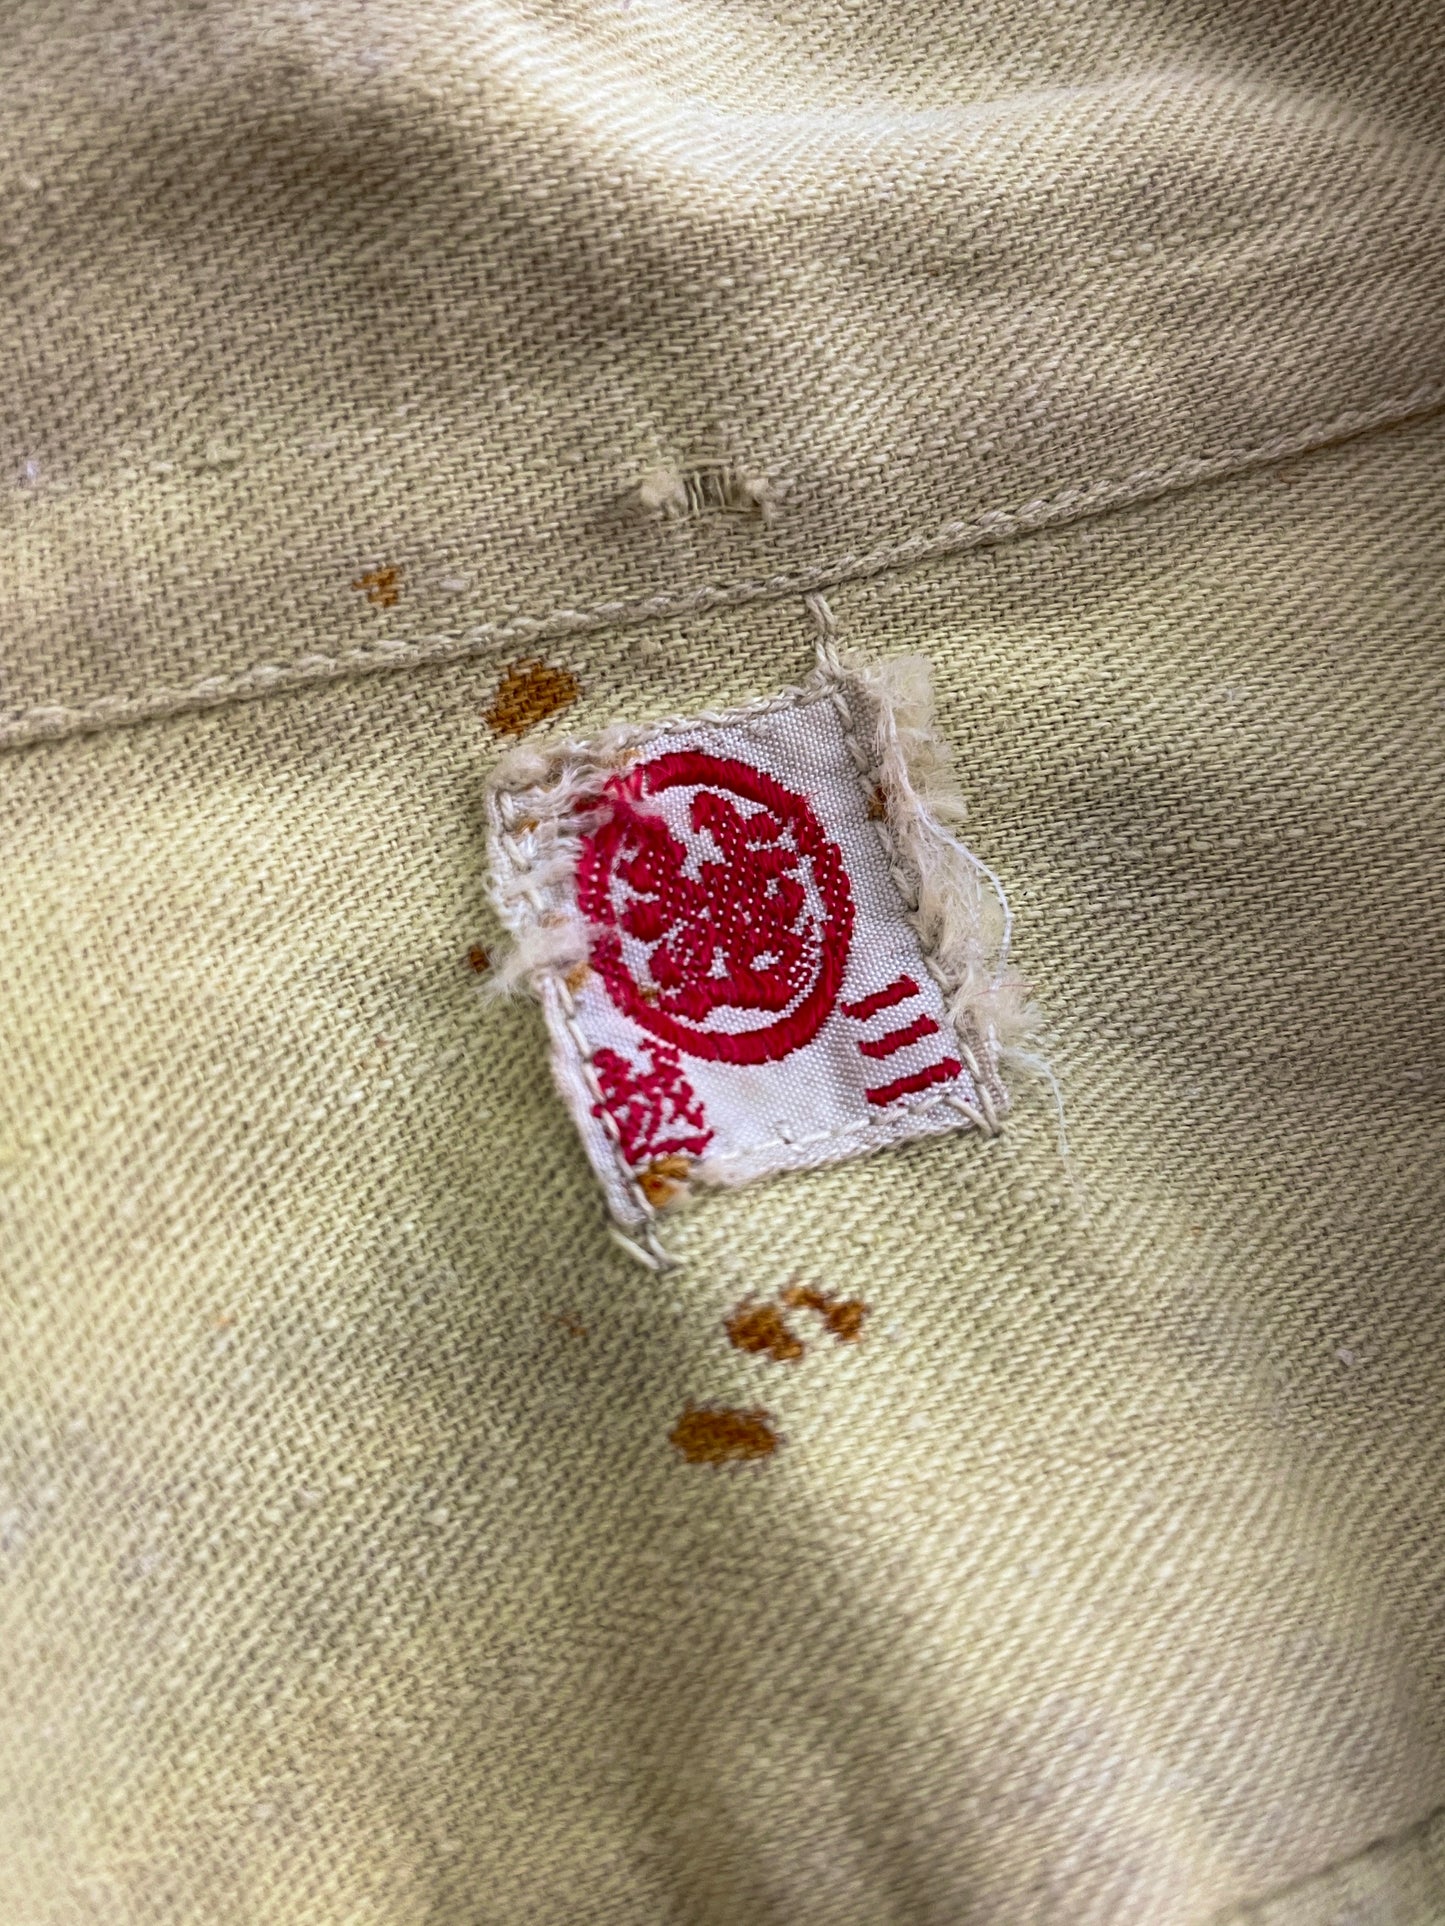 40's Japanese Patch/Repaired Work Shirt [S]